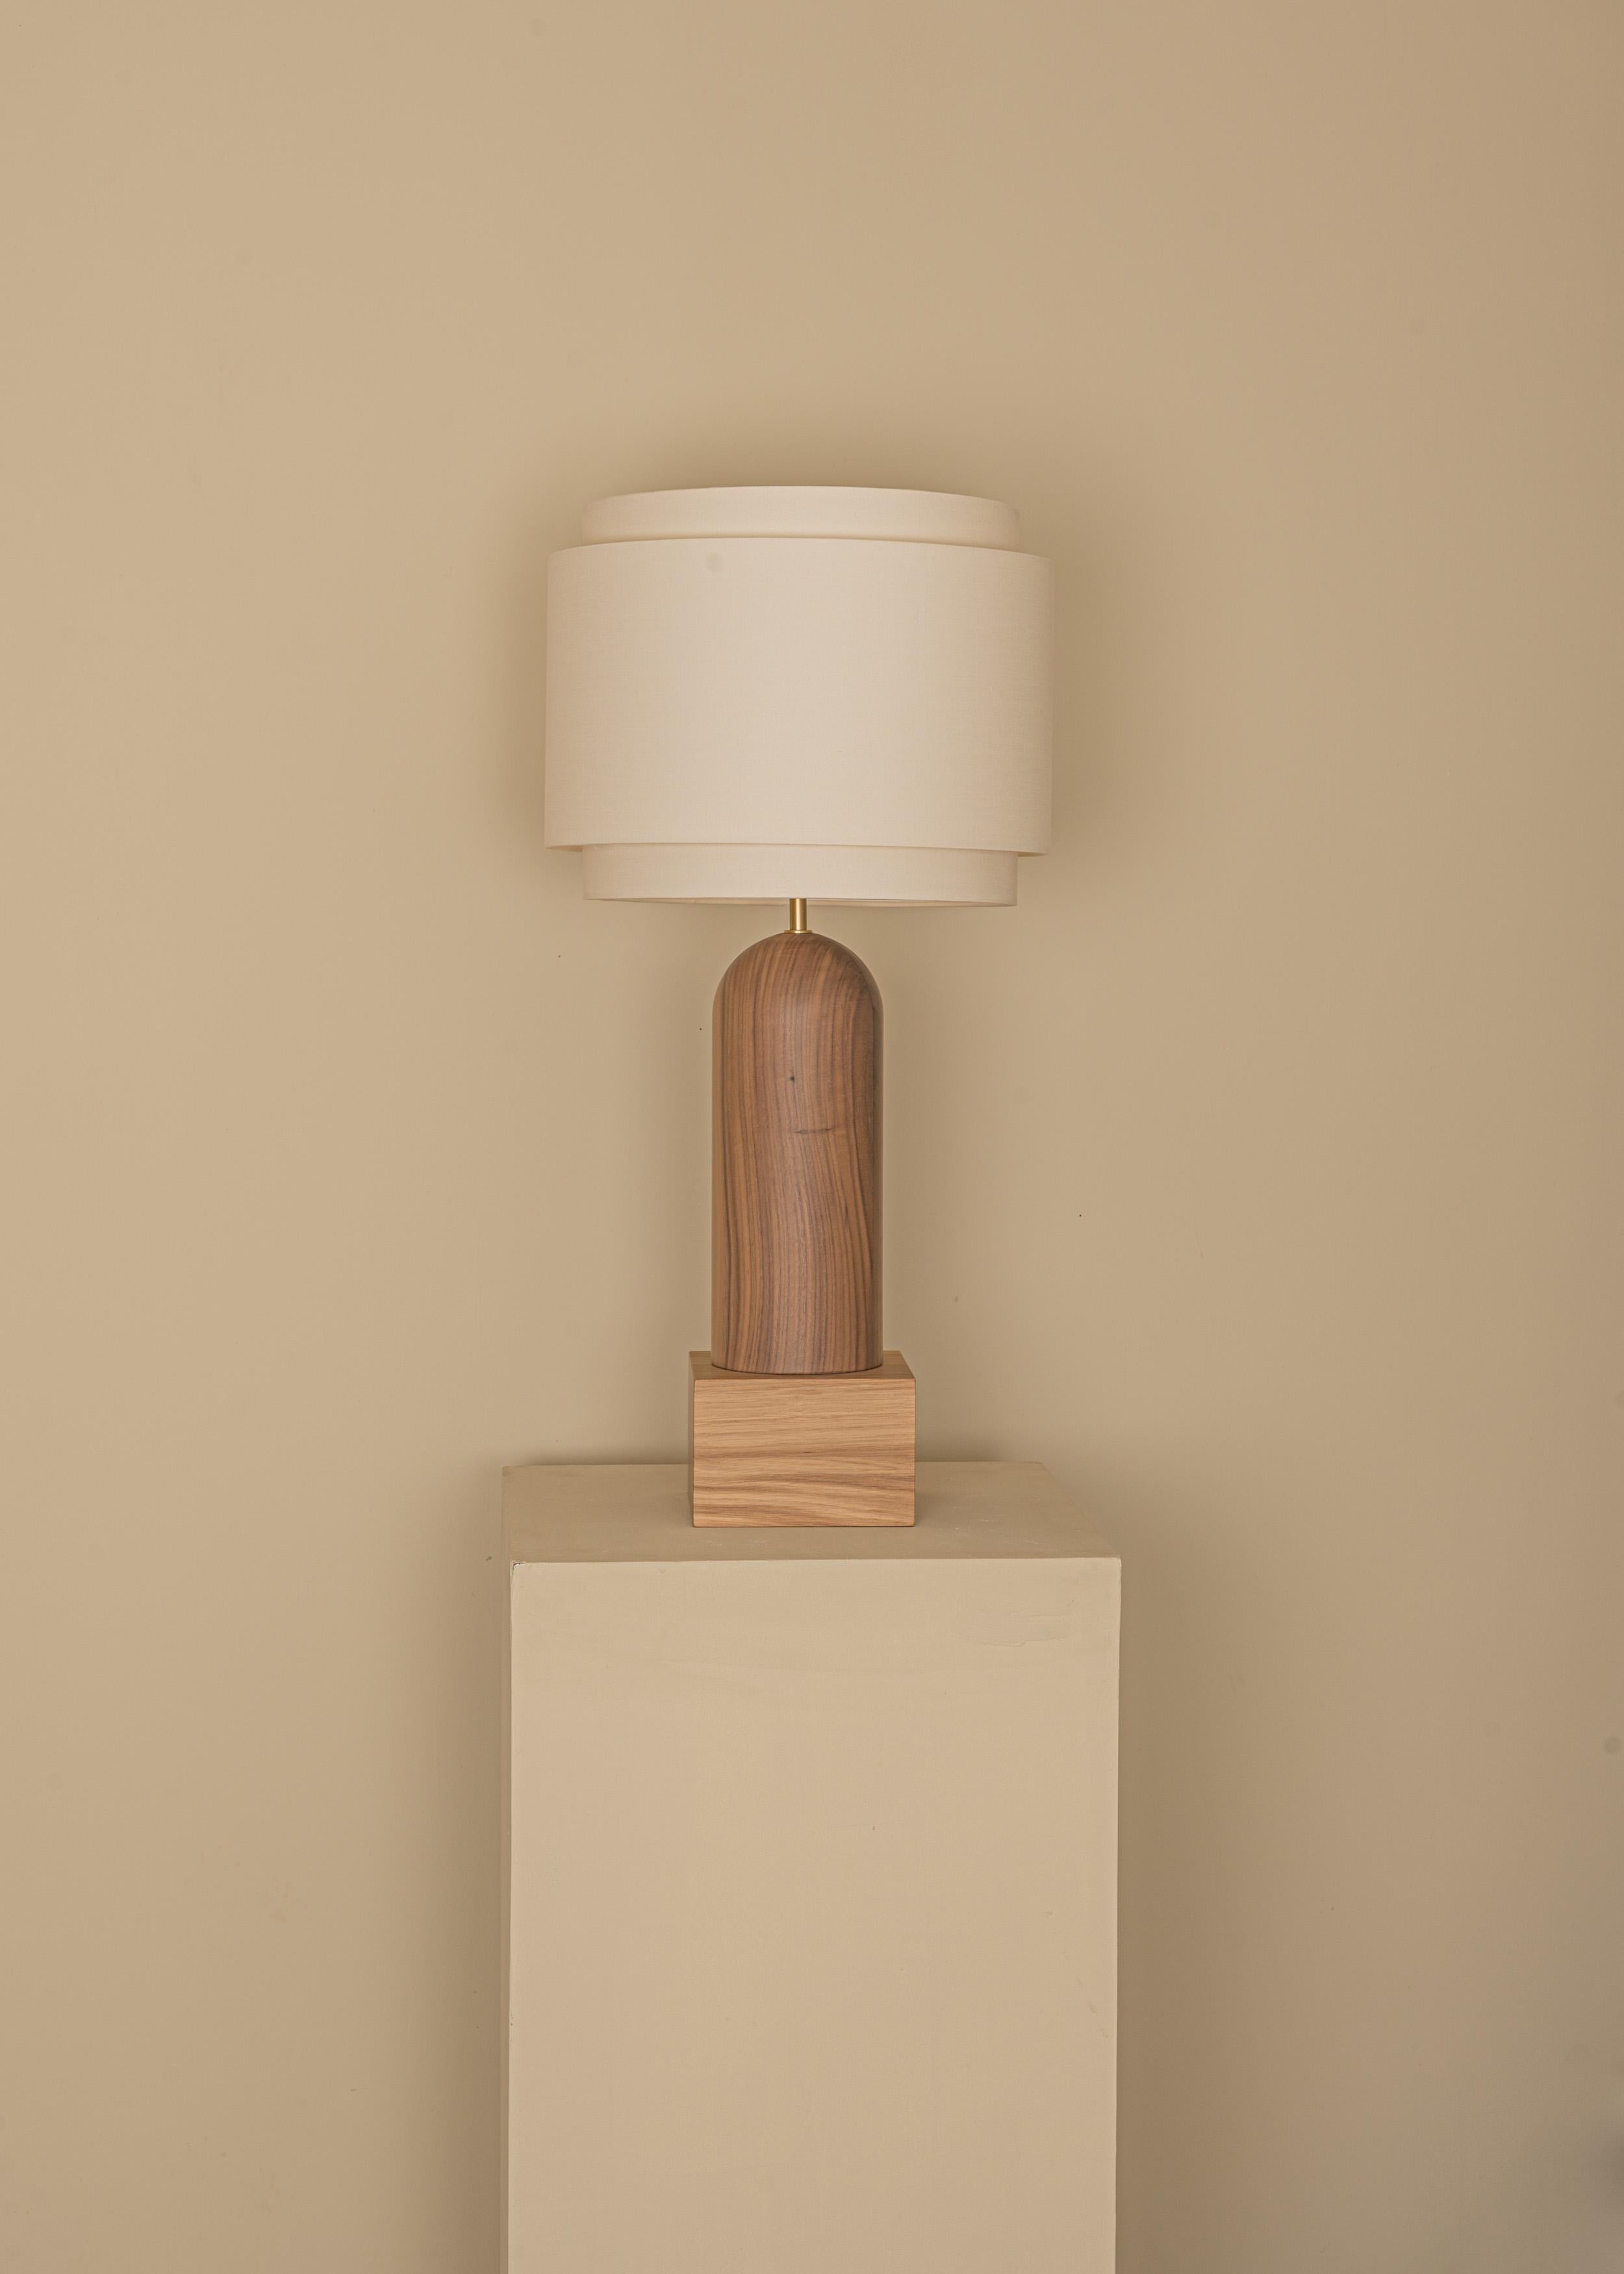 Walnut And Oak Base Pura Kelo Double Table Lamp by Simone & Marcel
Dimensions: D 35 x W 35 x H 69 cm.
Materials: Brass, cotton, oak and walnut.

Also available in different marble, wood and alabaster options and finishes. Custom options available on